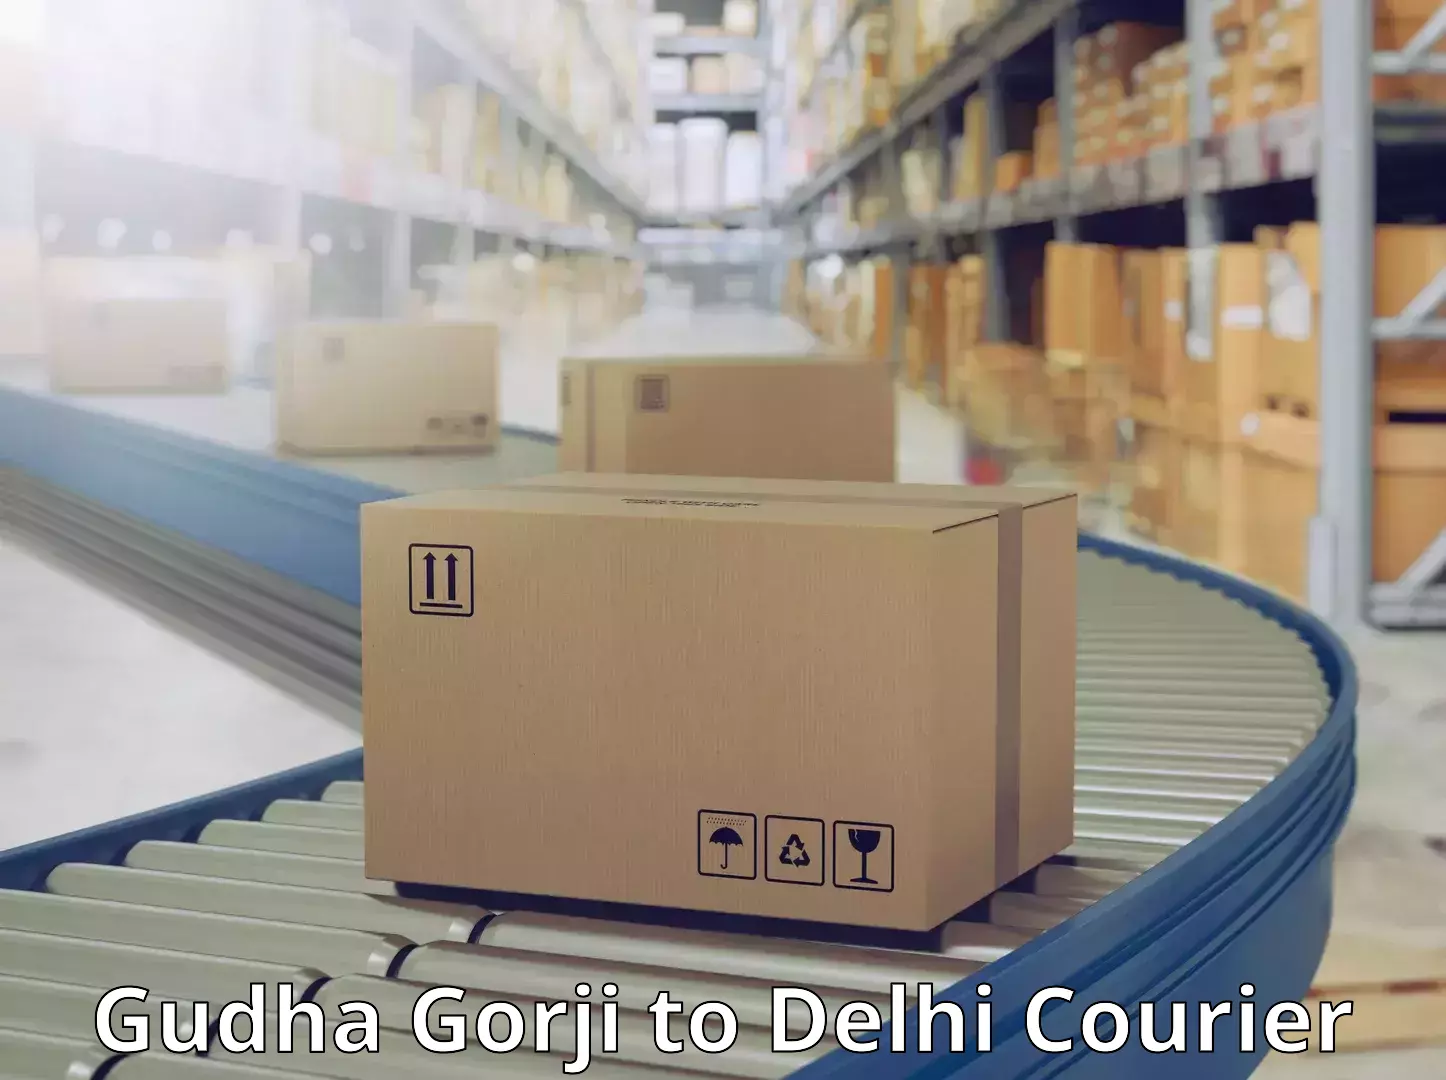 Cash on delivery service Gudha Gorji to Lodhi Road